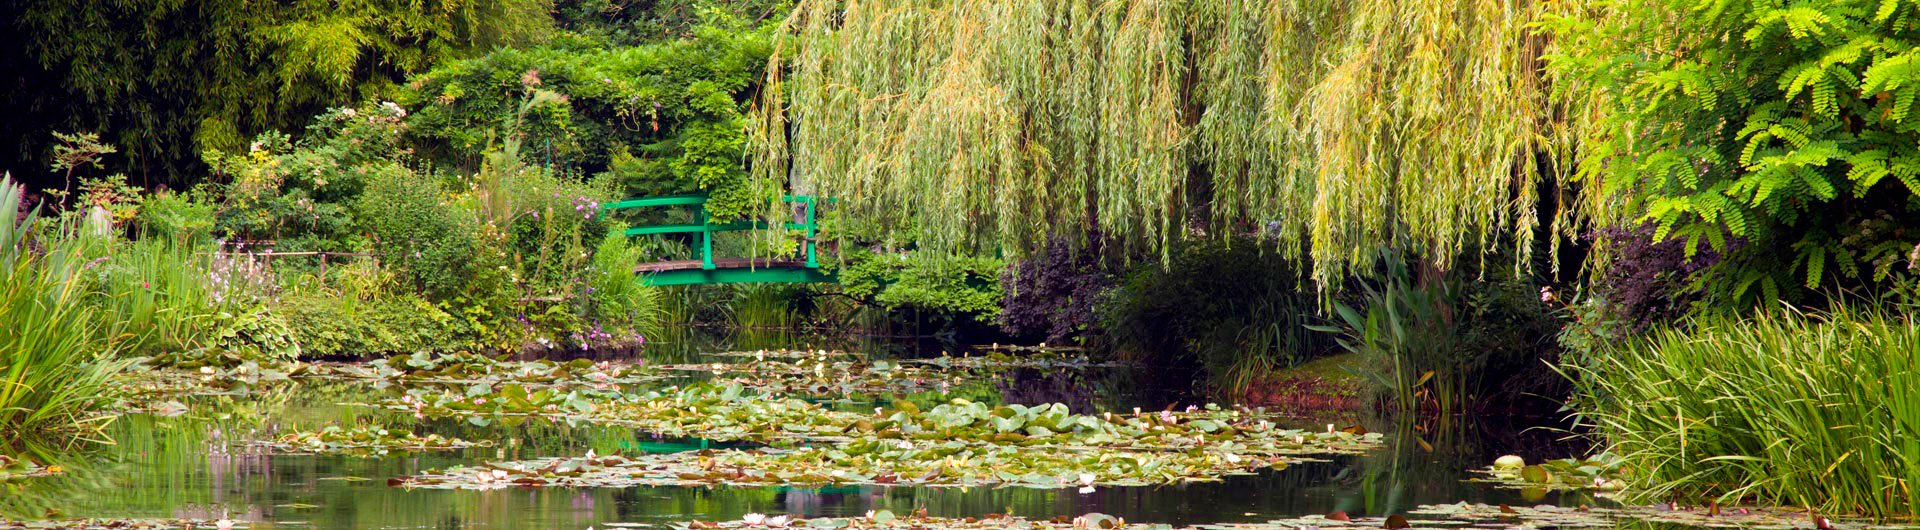 Guided tour of Giverny & Claude Monet